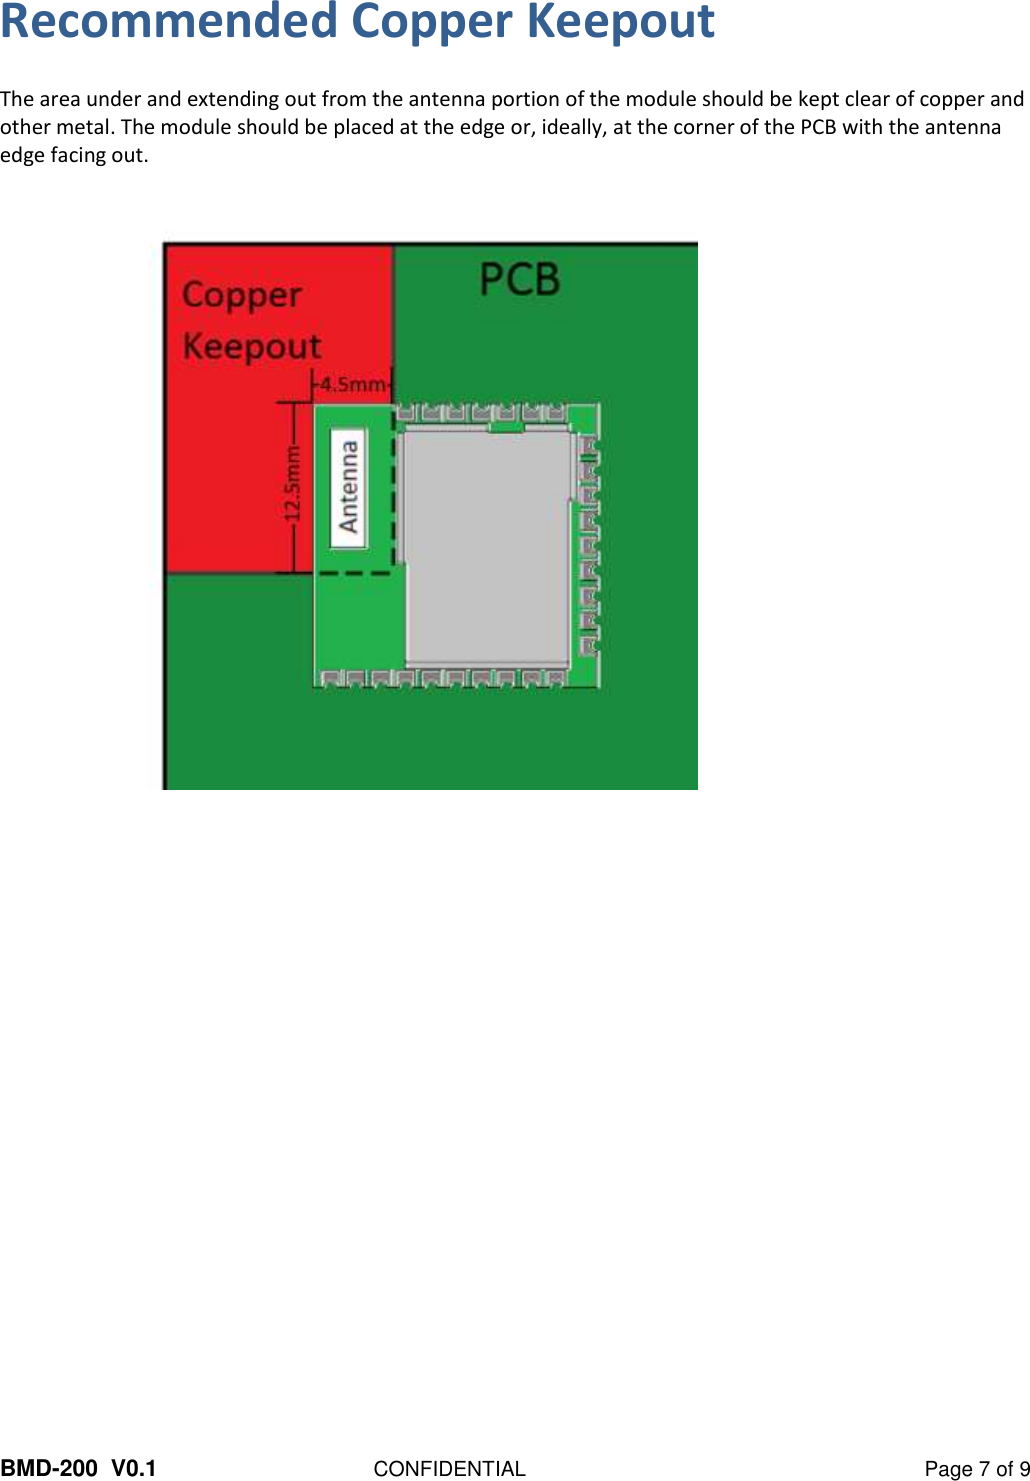  BMD-200  V0.1  CONFIDENTIAL  Page 7 of 9 Recommended Copper Keepout  The area under and extending out from the antenna portion of the module should be kept clear of copper and other metal. The module should be placed at the edge or, ideally, at the corner of the PCB with the antenna edge facing out.      